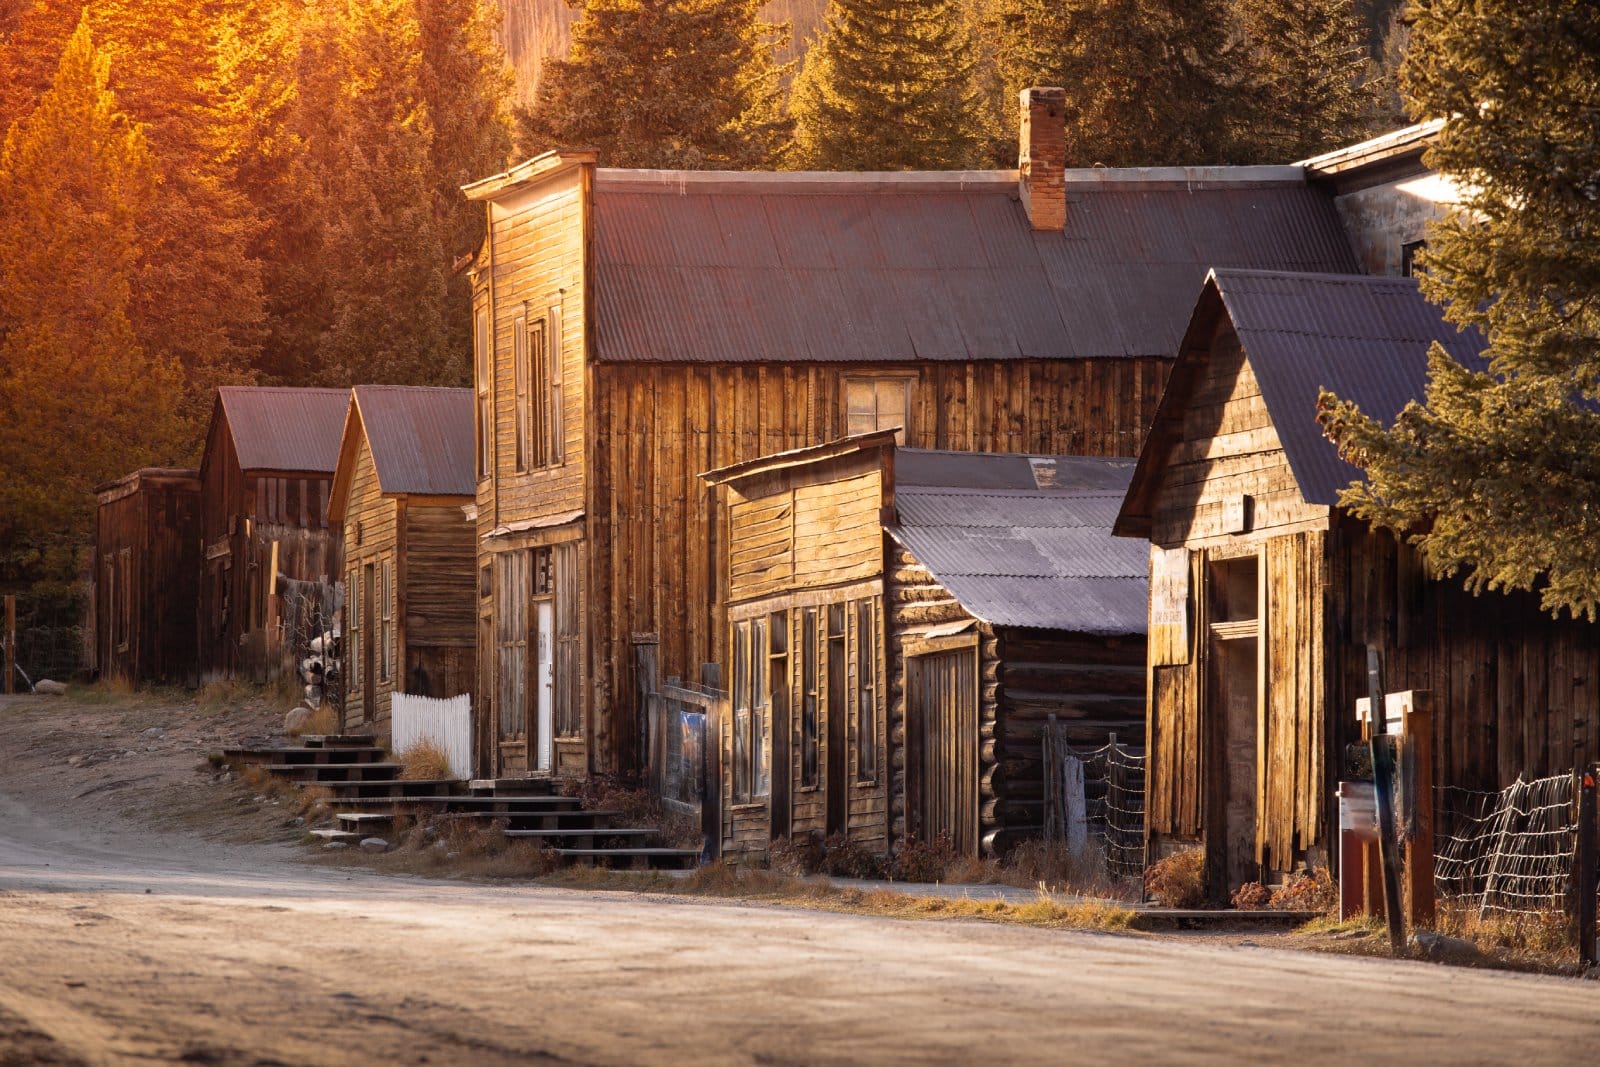 <p class="wp-caption-text">Image Credit: Shutterstock / Atmosphere1</p>  <p><span>Colorado is dotted with ghost towns that come alive in spring. Visit St. Elmo or Independence for a spooky adventure, with free access to these historic sites.</span></p>